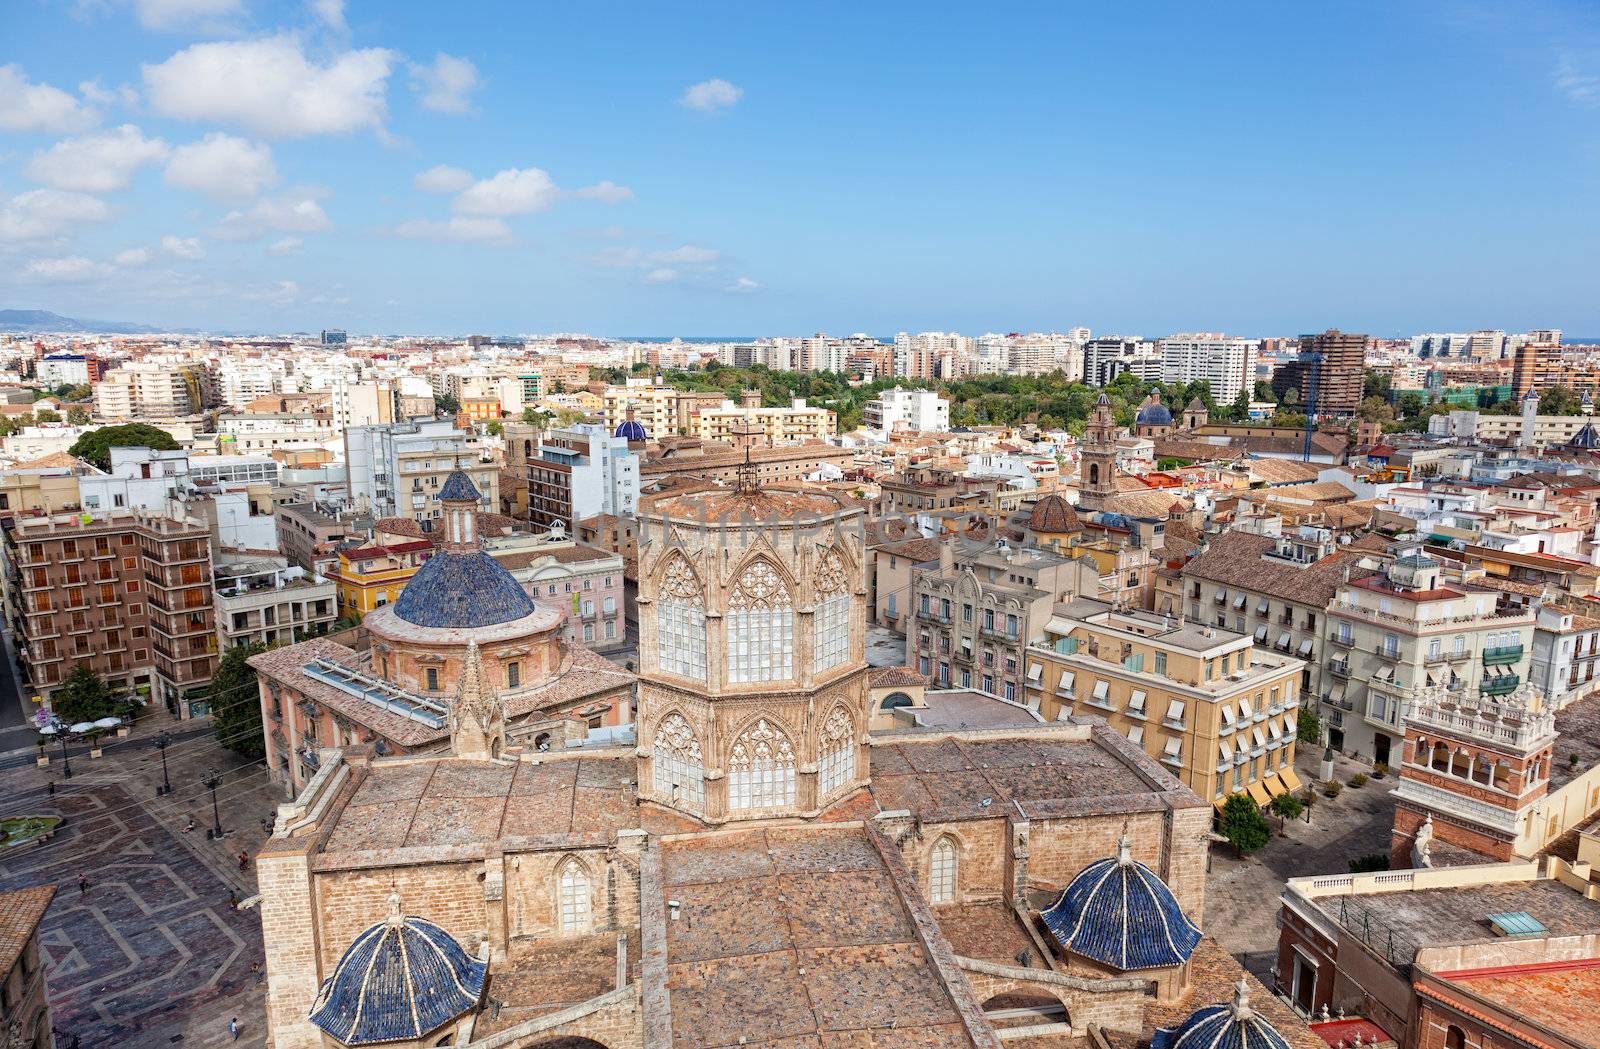 View of the historical center of Valencia from an observation deck of the Cathedral, Spain